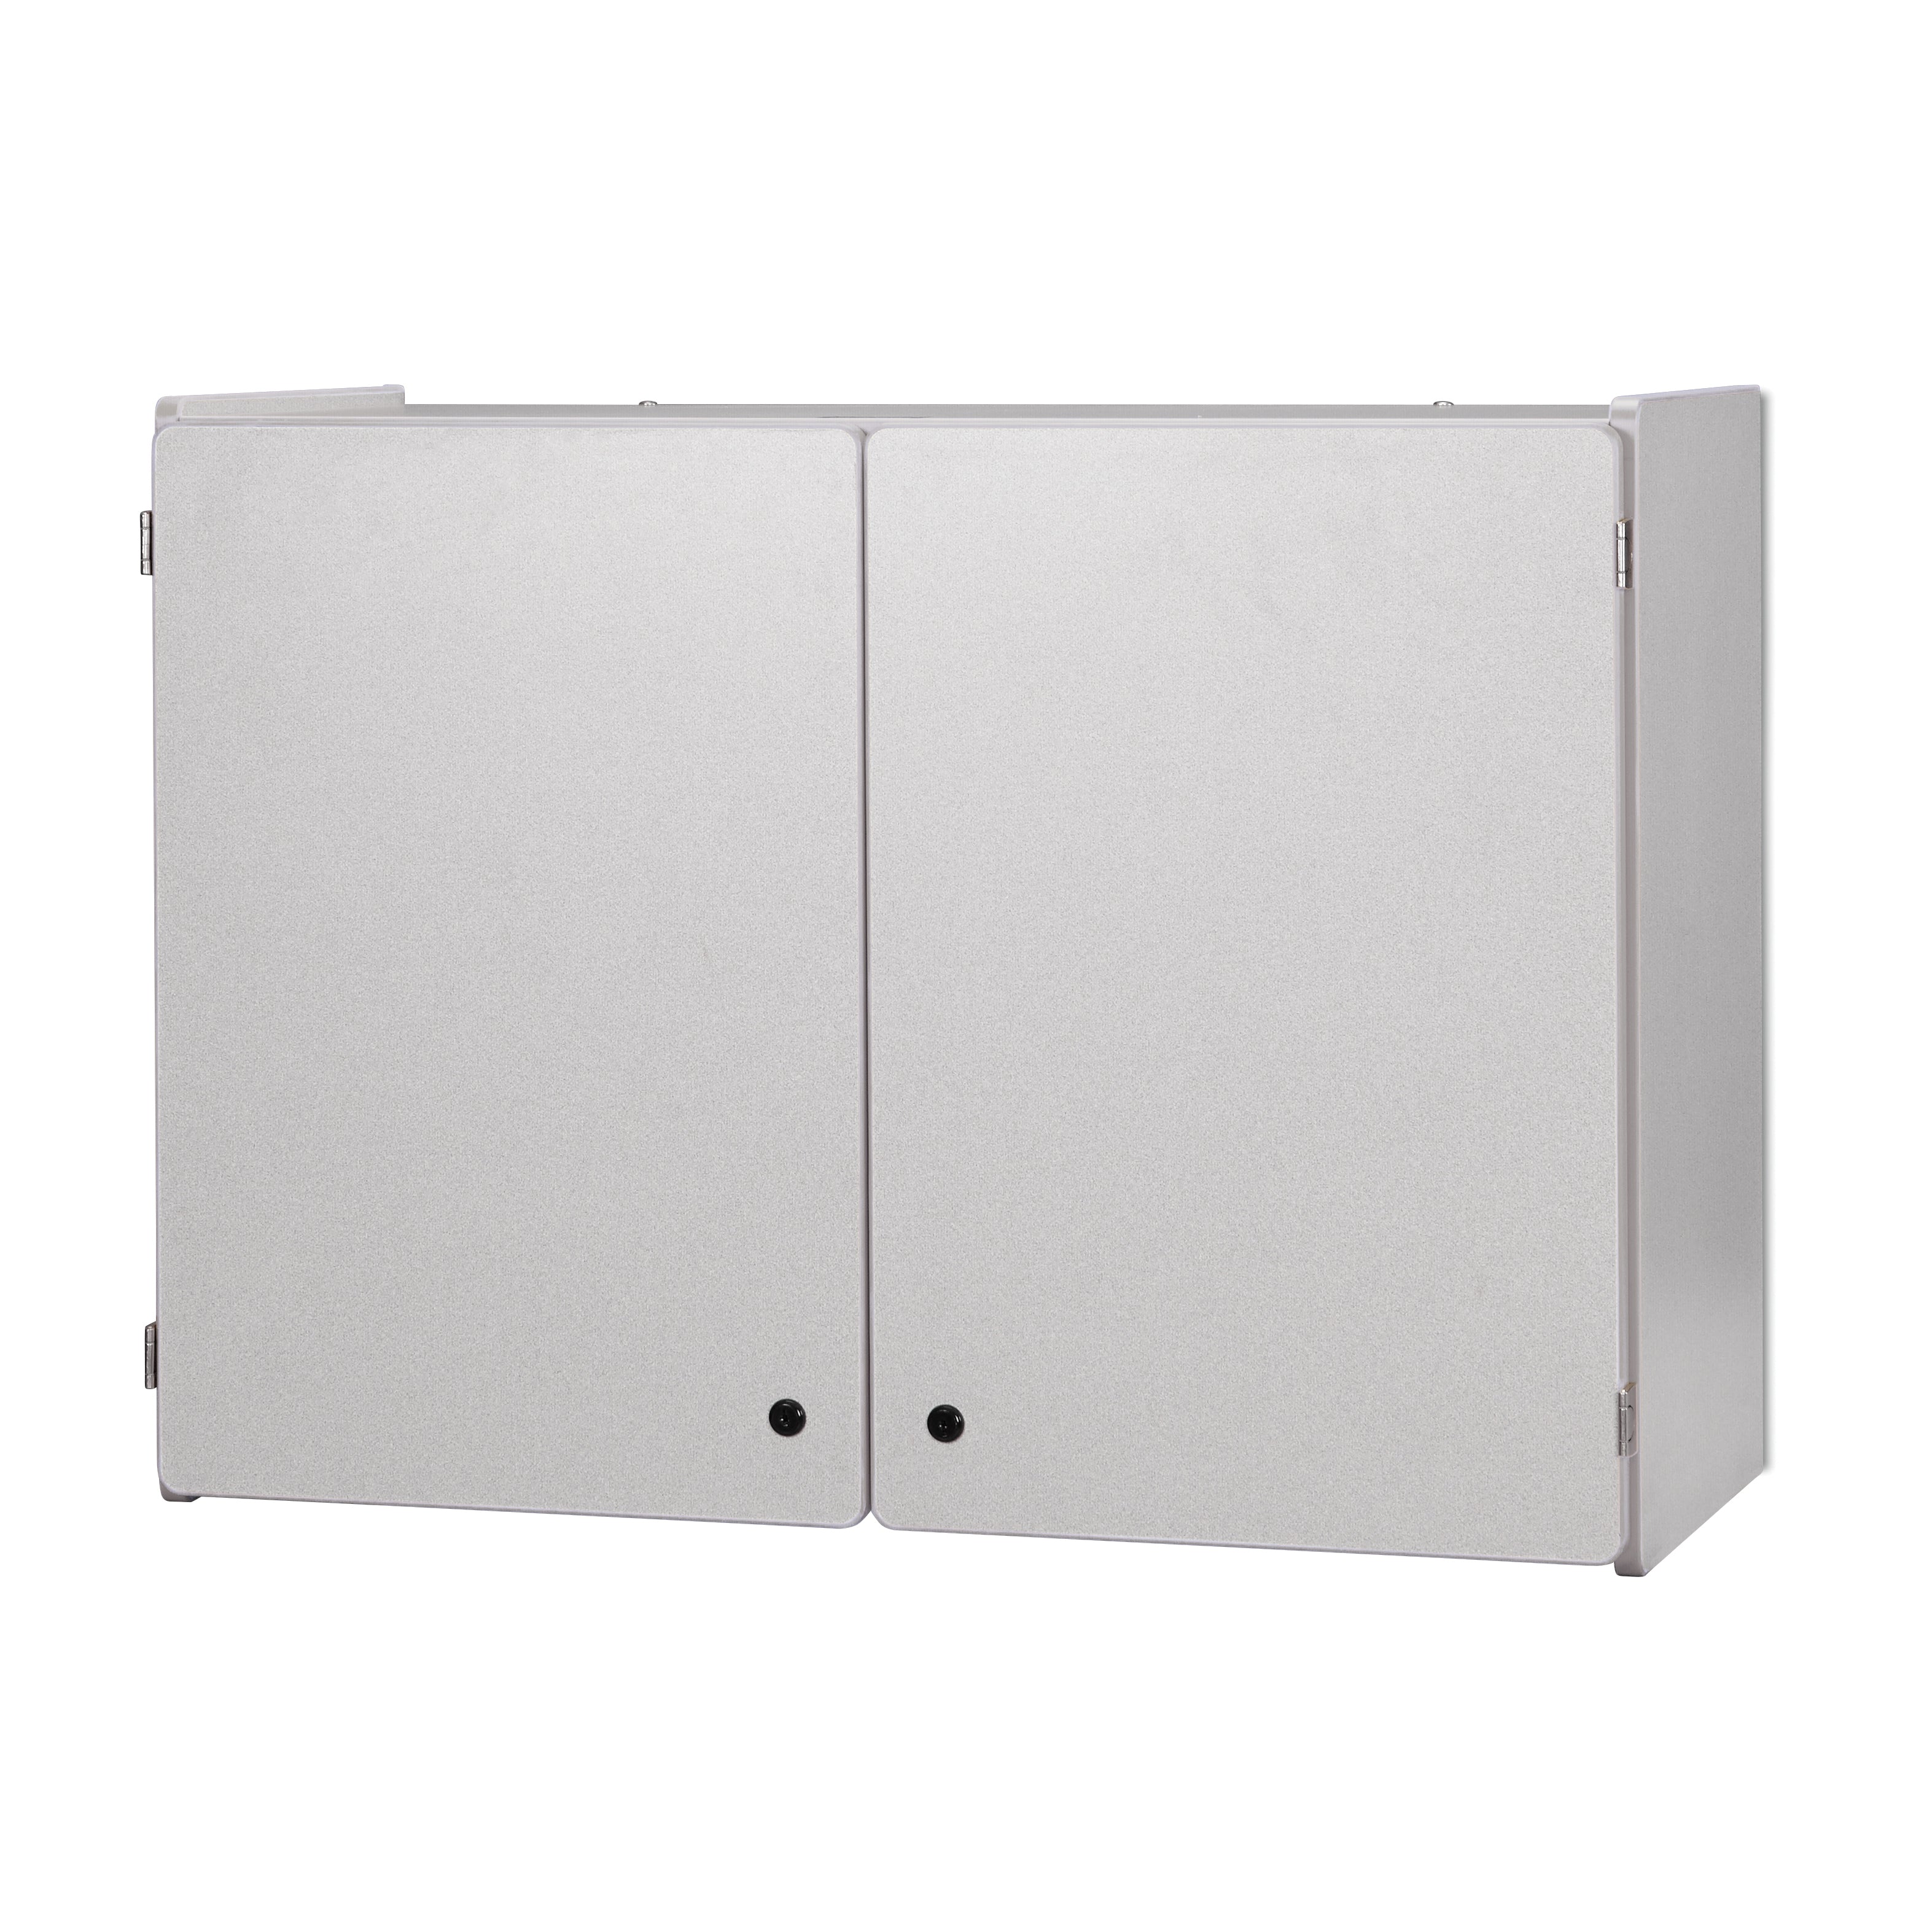 0945JC000, Rainbow Accents Lockable Wall Cabinet  - Gray